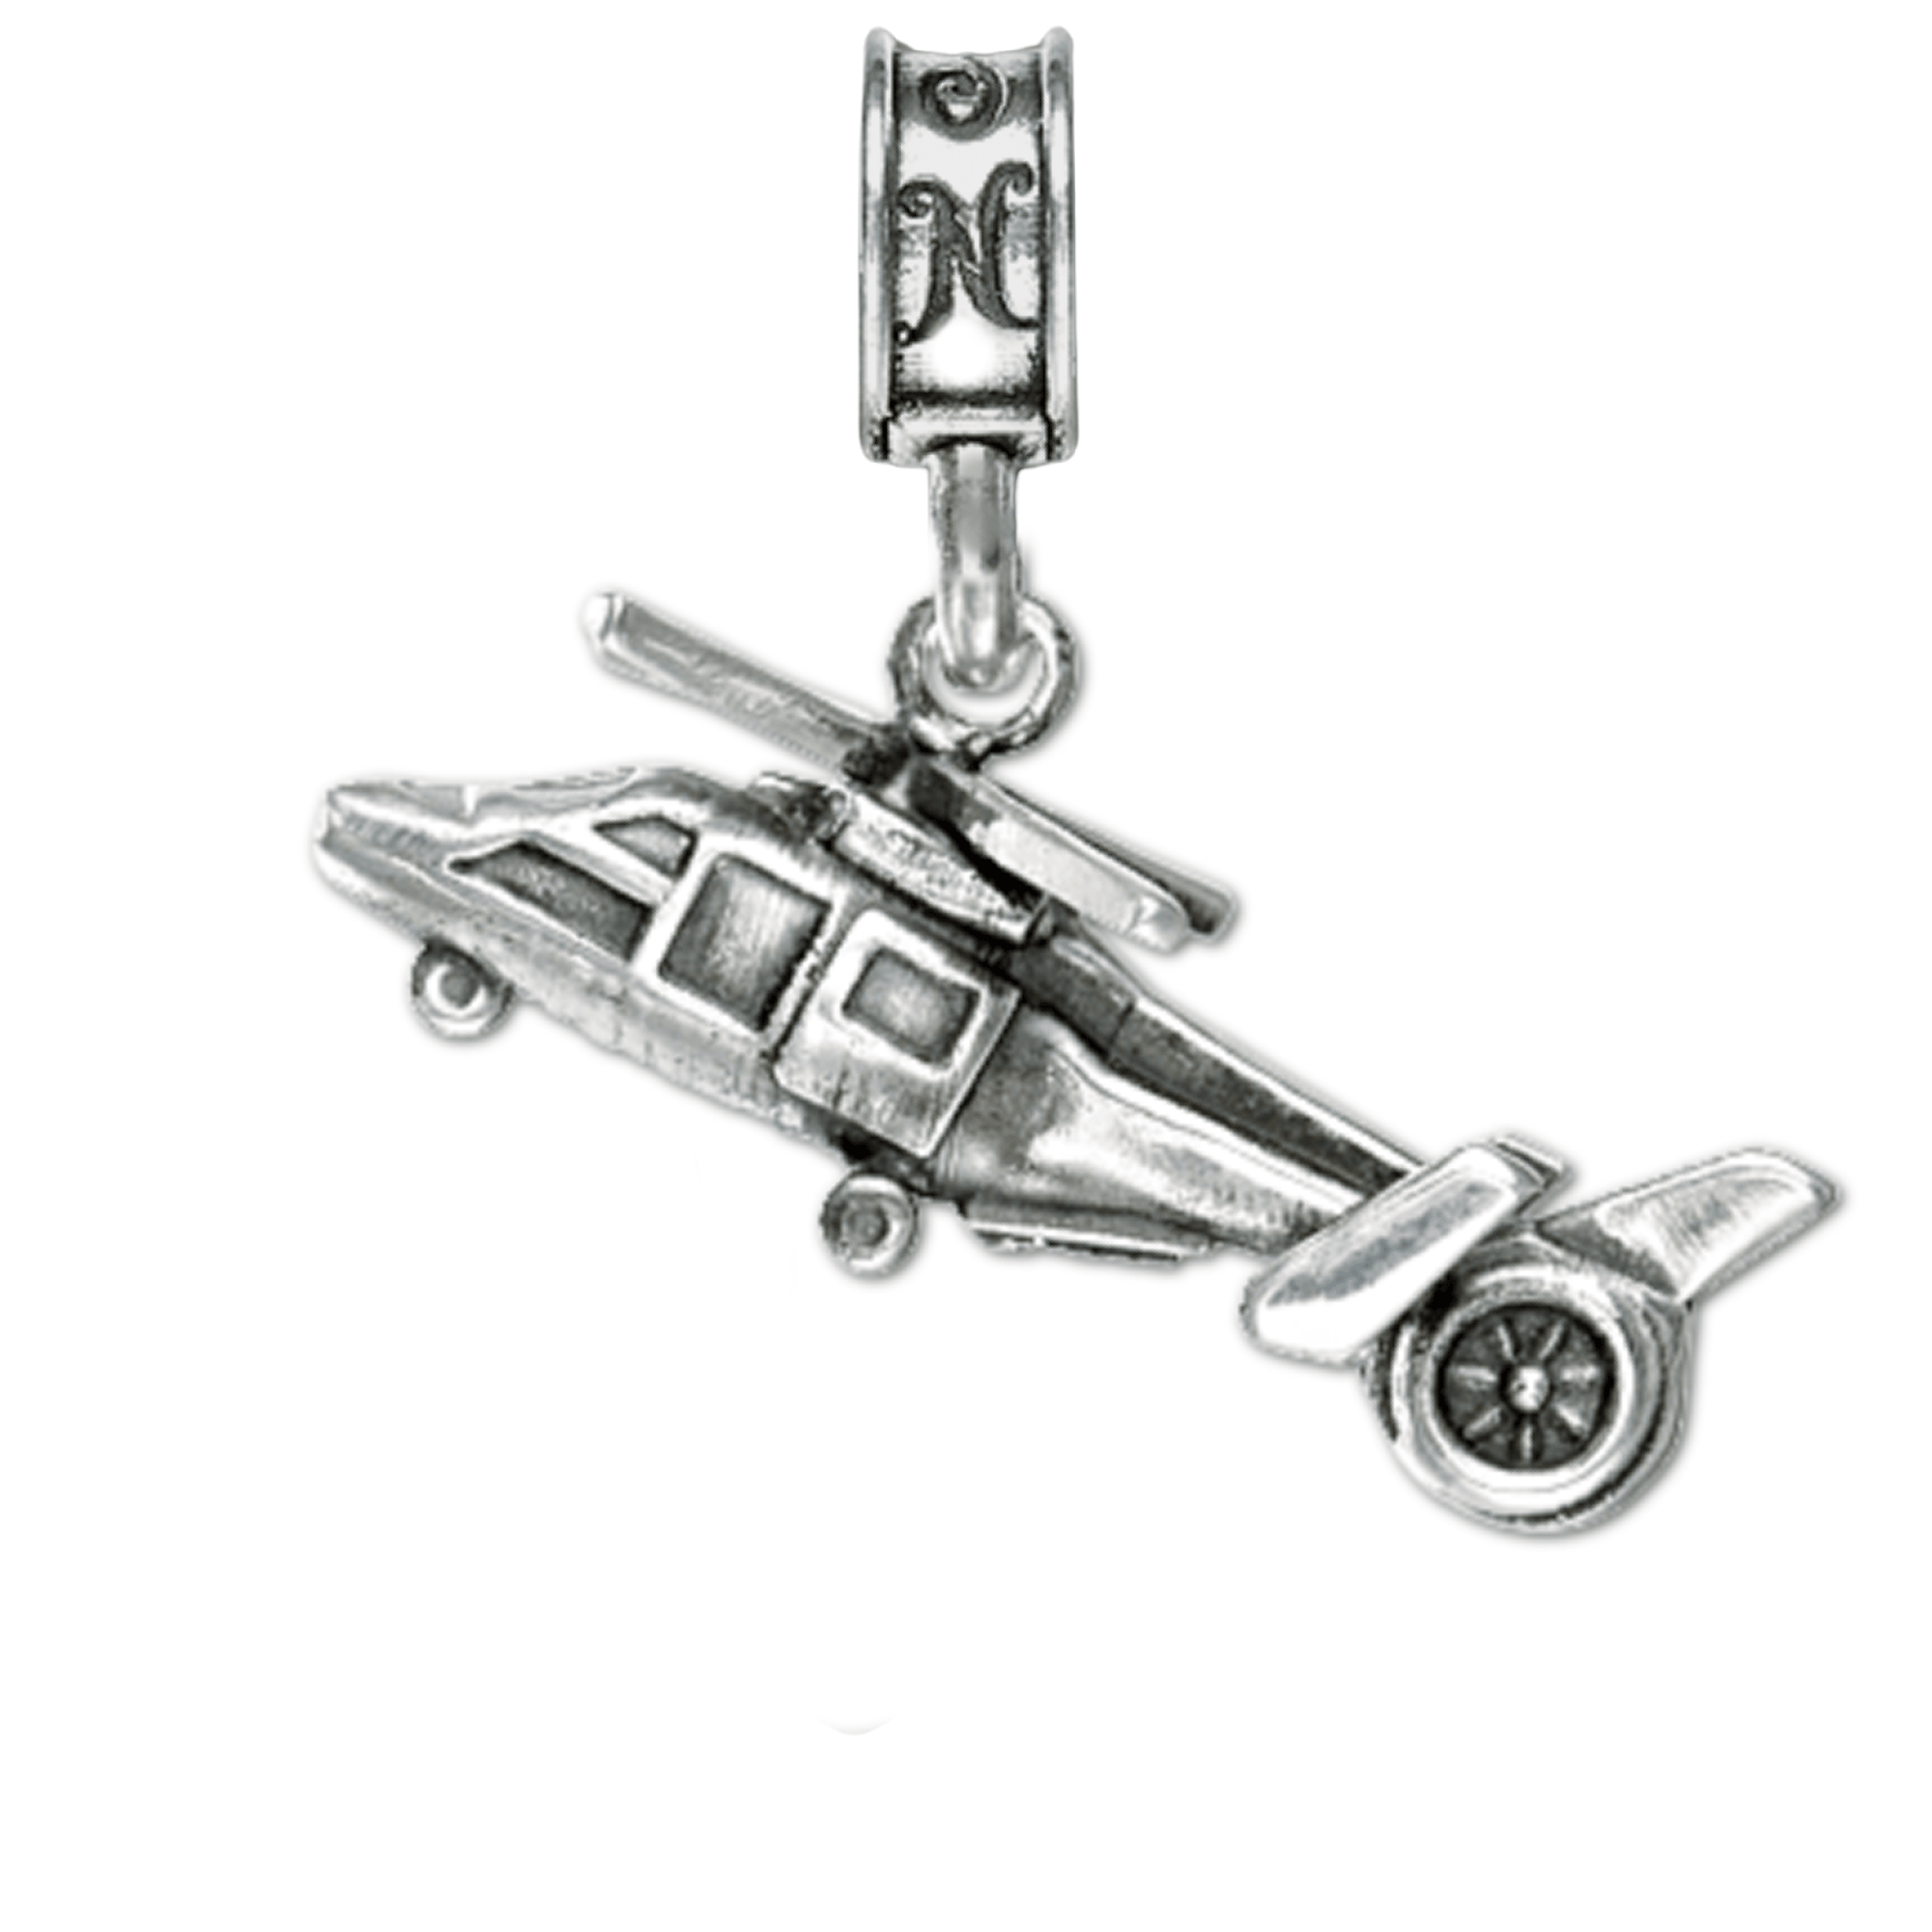 Military Jewelry, Military Charms, Military Gifts, Military Aviation, MH-65 Helicopter Charm